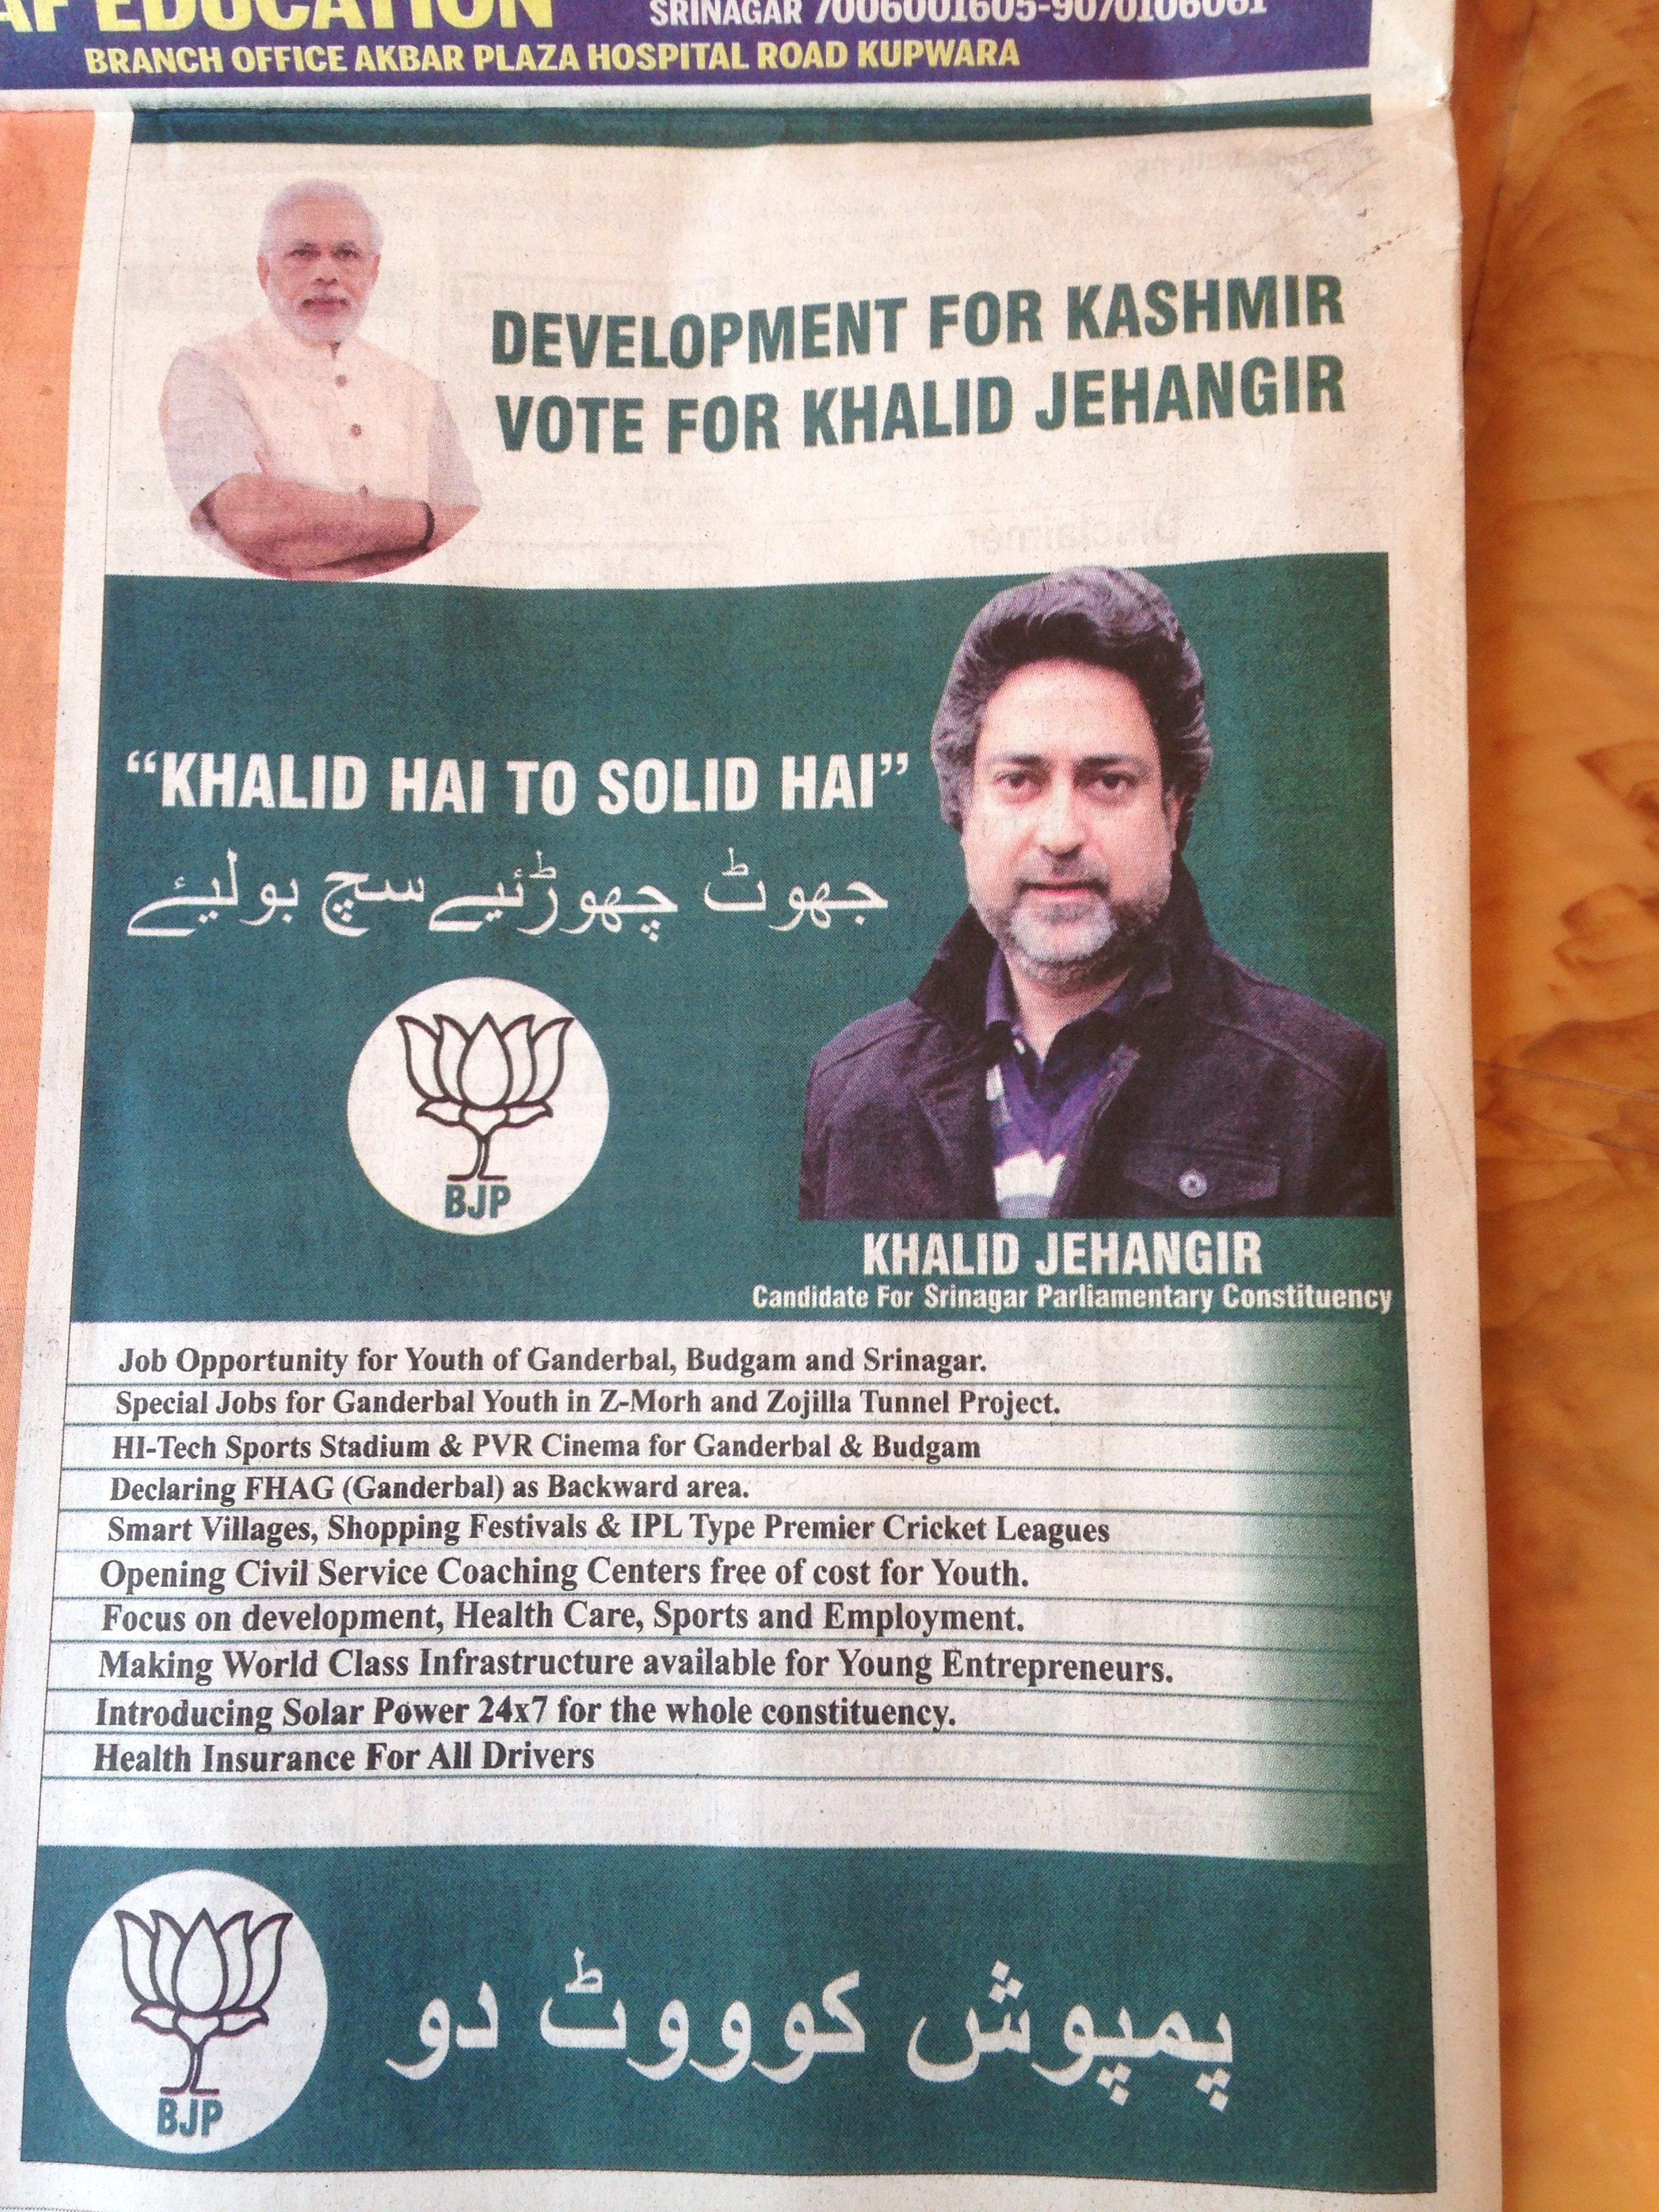 The newspaper ad featuring PM Narendra Modi and BJP's local candidate | Azaan Javaid/Twitter